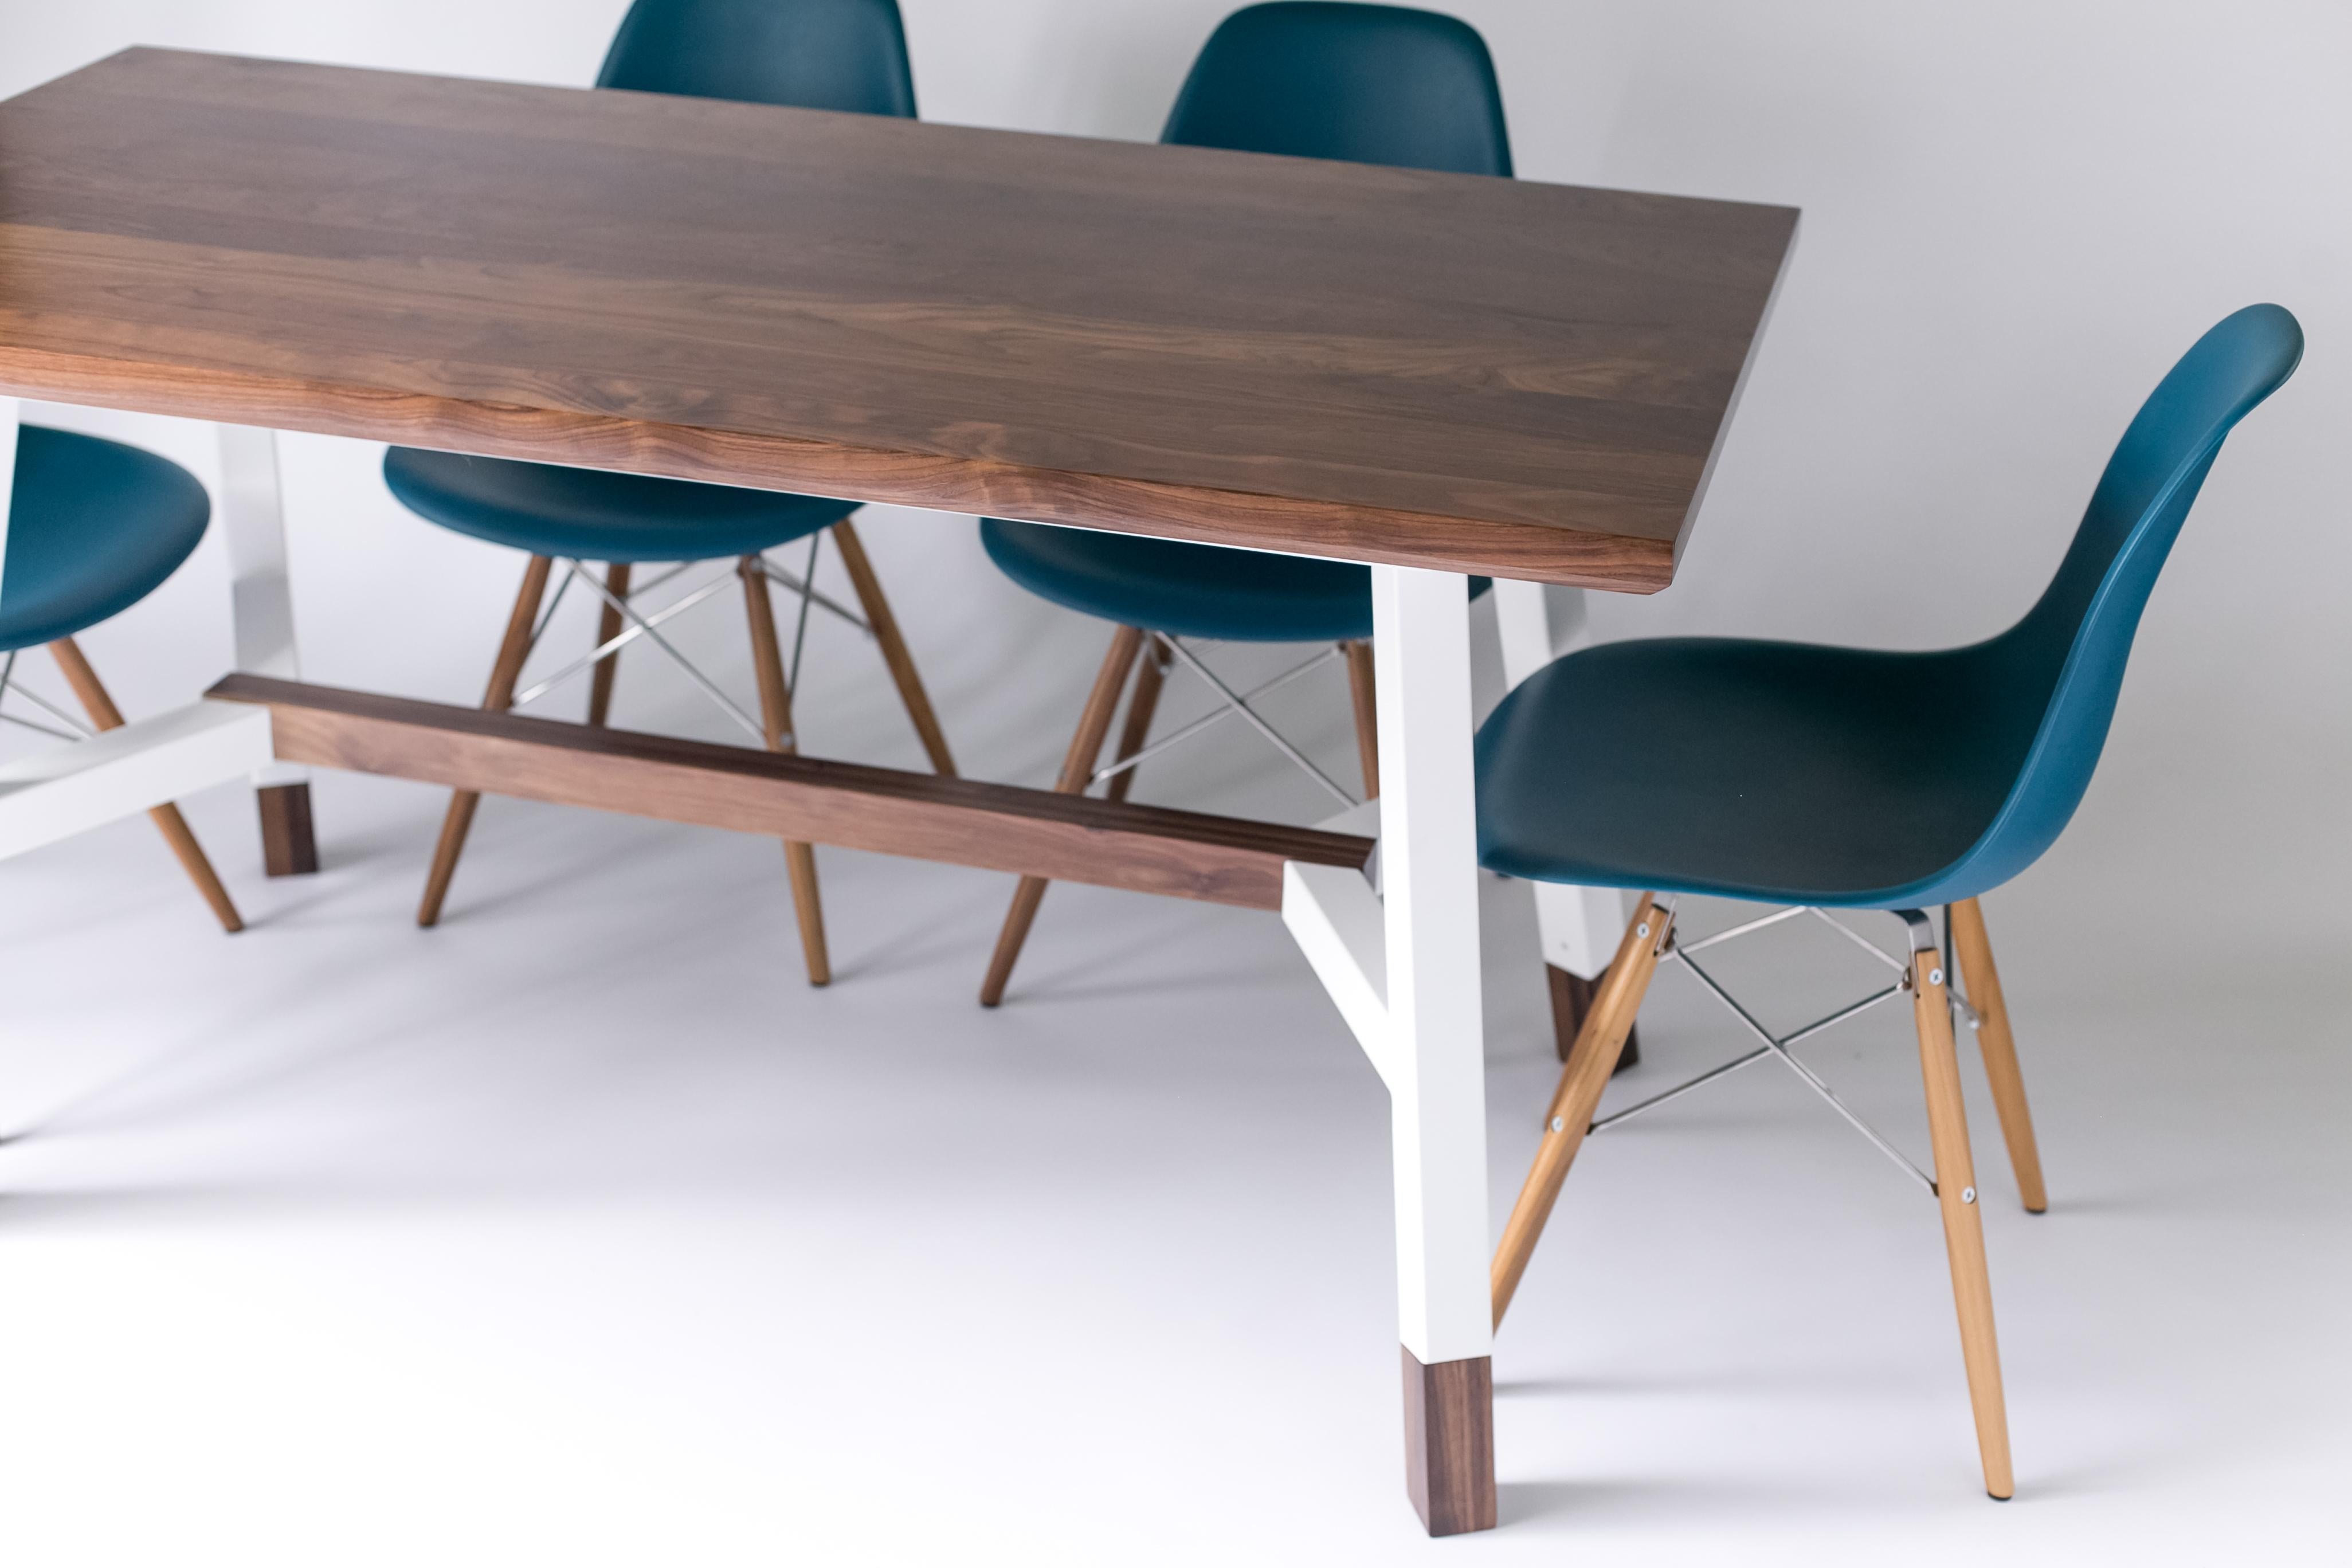 The A-Frame, Modern Walnut and White Powder Coated Steel Dining Table 1